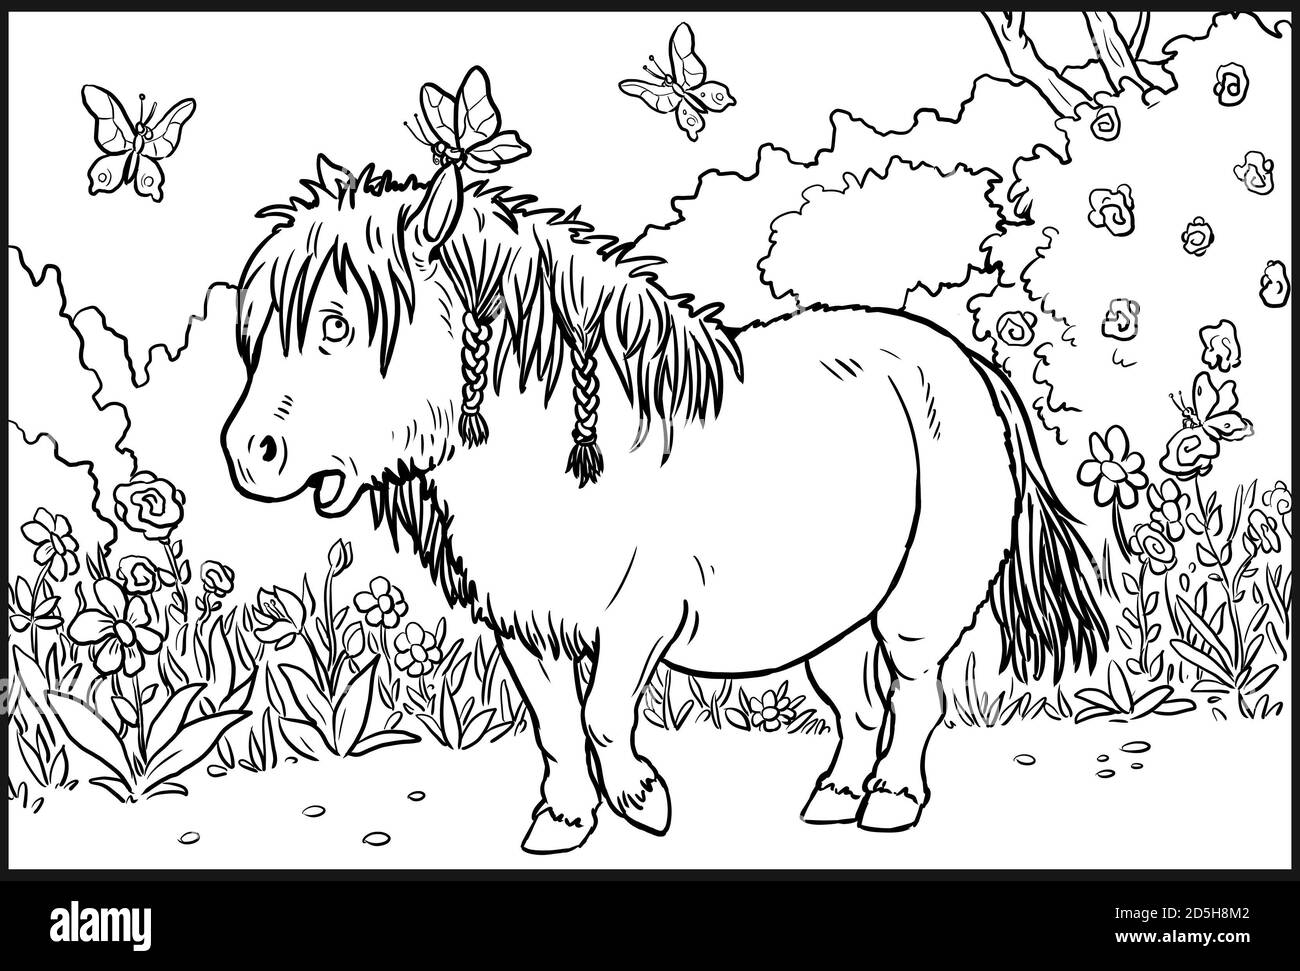 Horse Coloring Books For Adults: Black Background: Horse Colouring Pages  for Everyone, Adults, Teens, Boys and Girls - Art Therapy Coloring